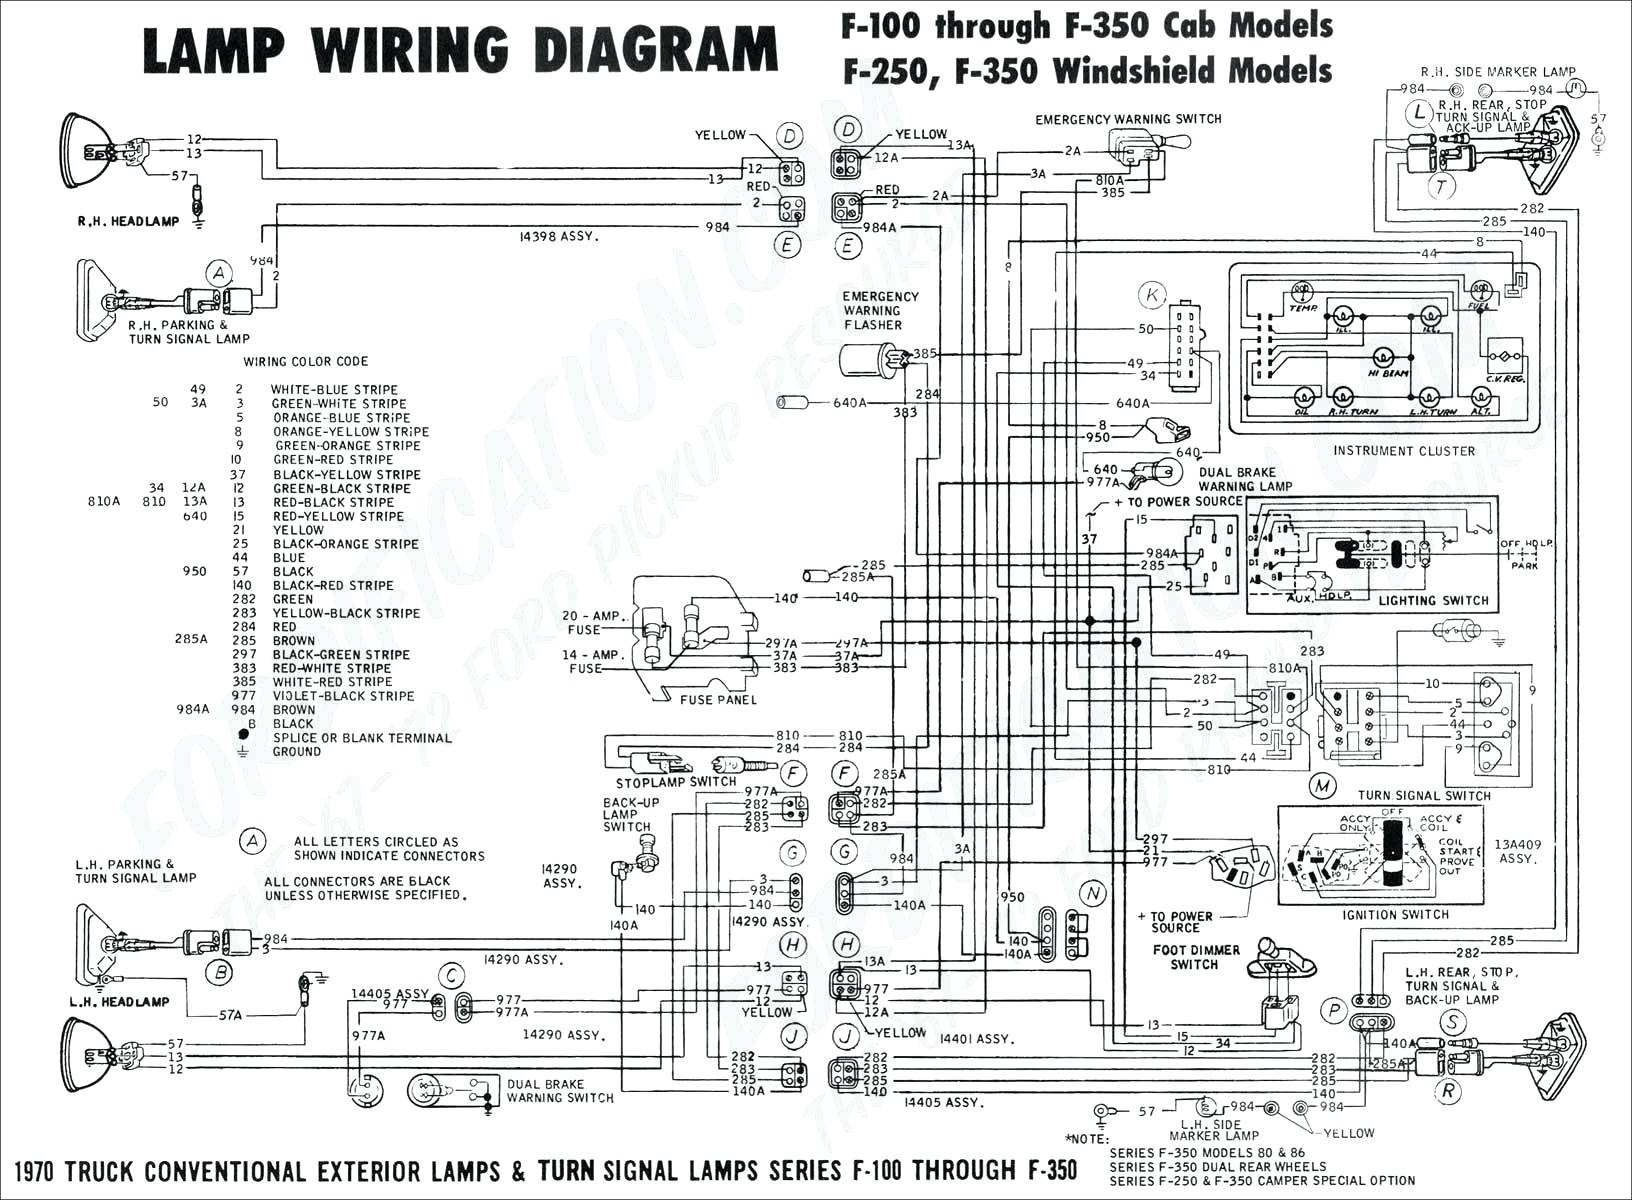 1994 Jeep Grand Cherokee Radio Wiring Diagram Electrical Circuit 2000 ford Mustang Stereo Wiring Diagram Autos